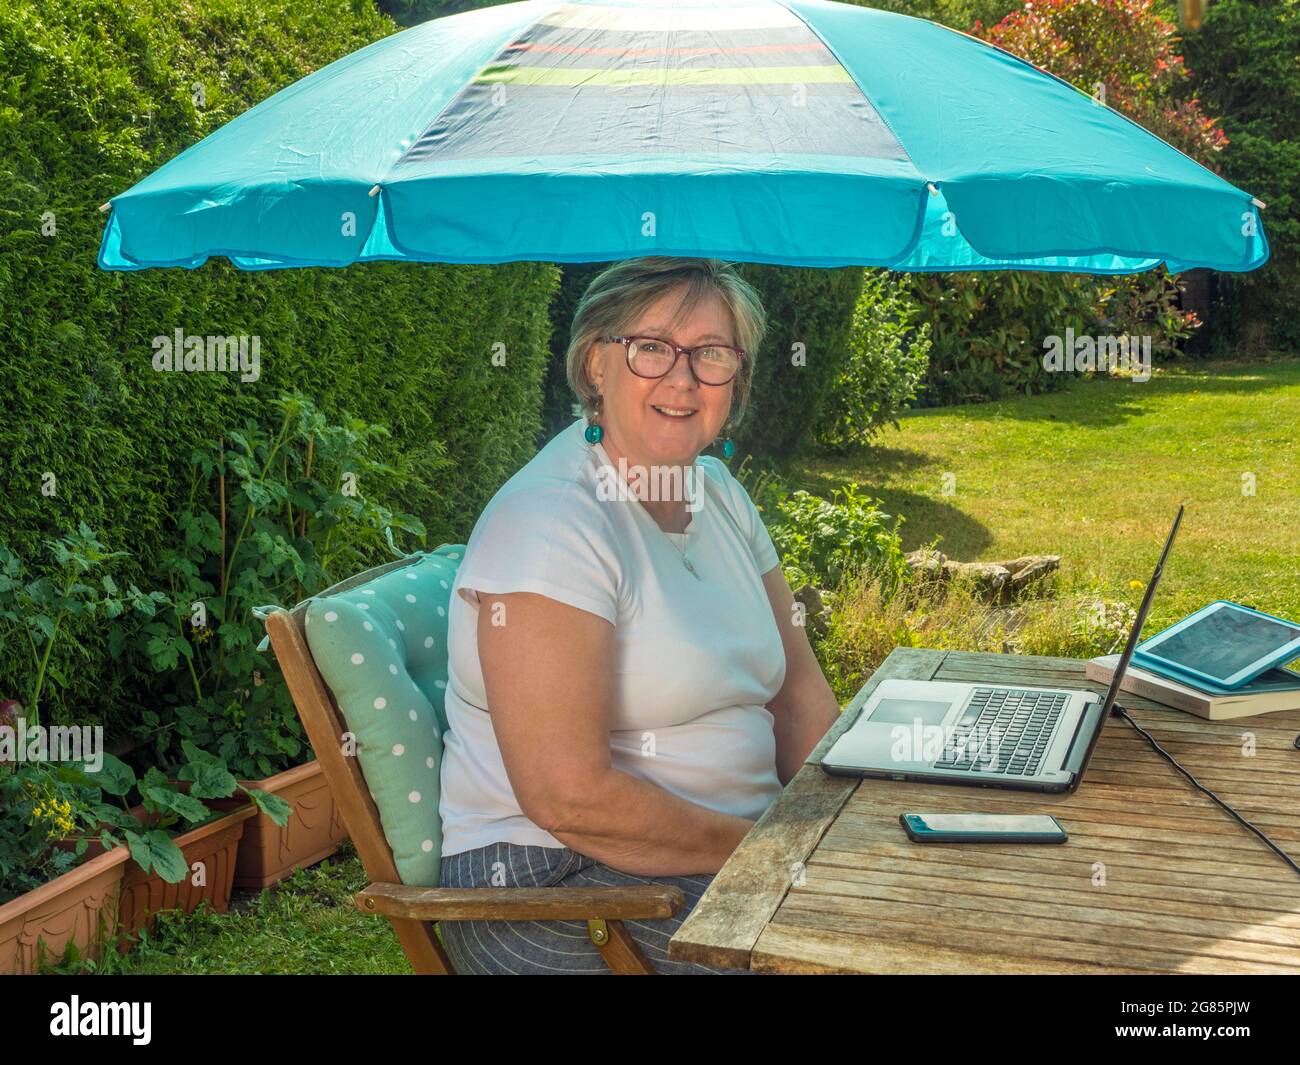 A mature woman sitting in a chair at a table, outside in a sunny garden / yard, under a sunshade, using a laptop computer, facing camera and smiling. Stock Photo